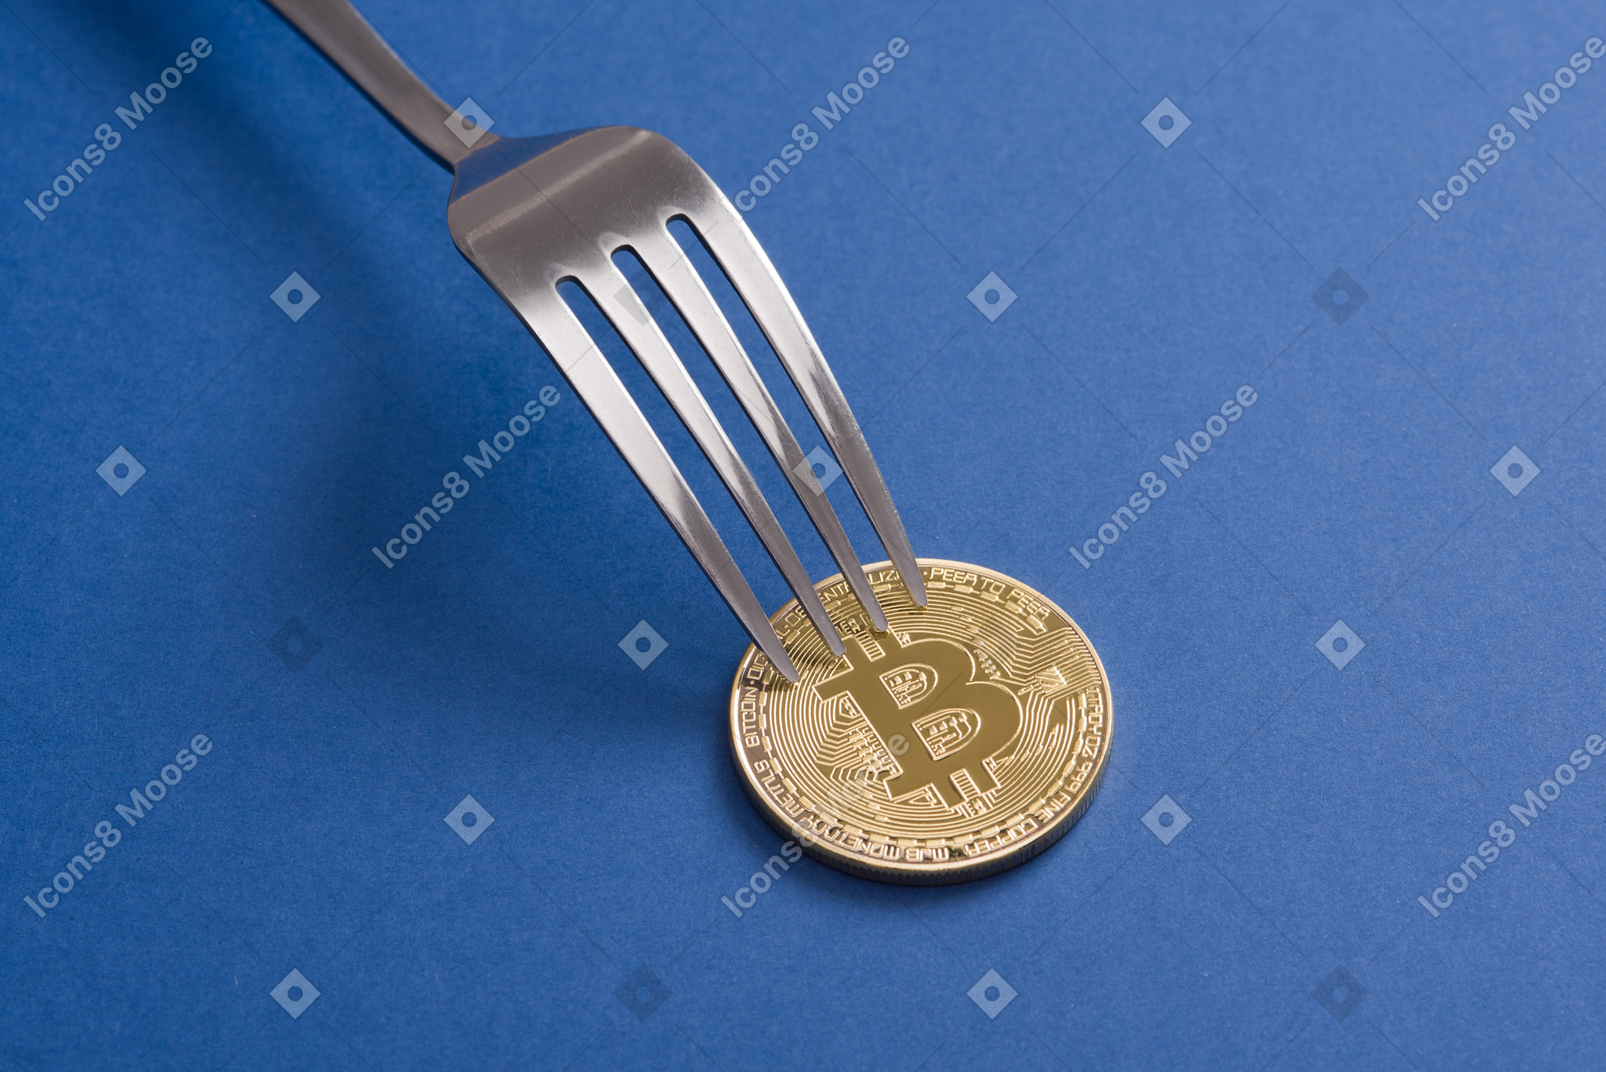 Bitcoin and fork on blue background